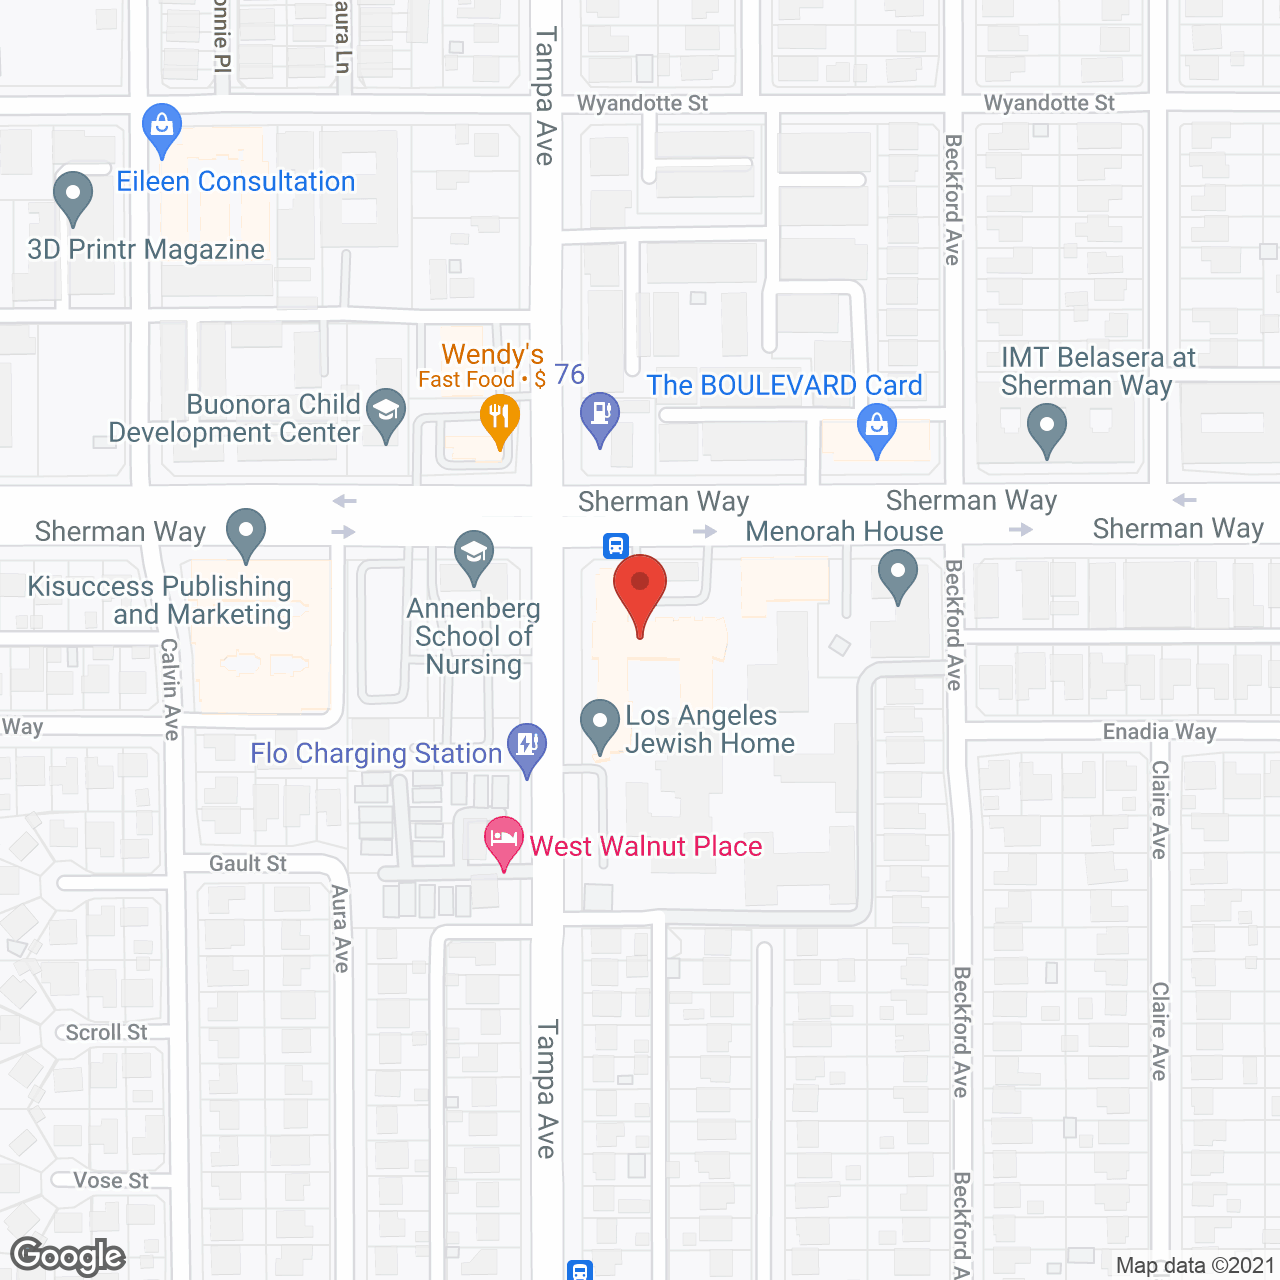 Los Angeles Jewish Home in google map